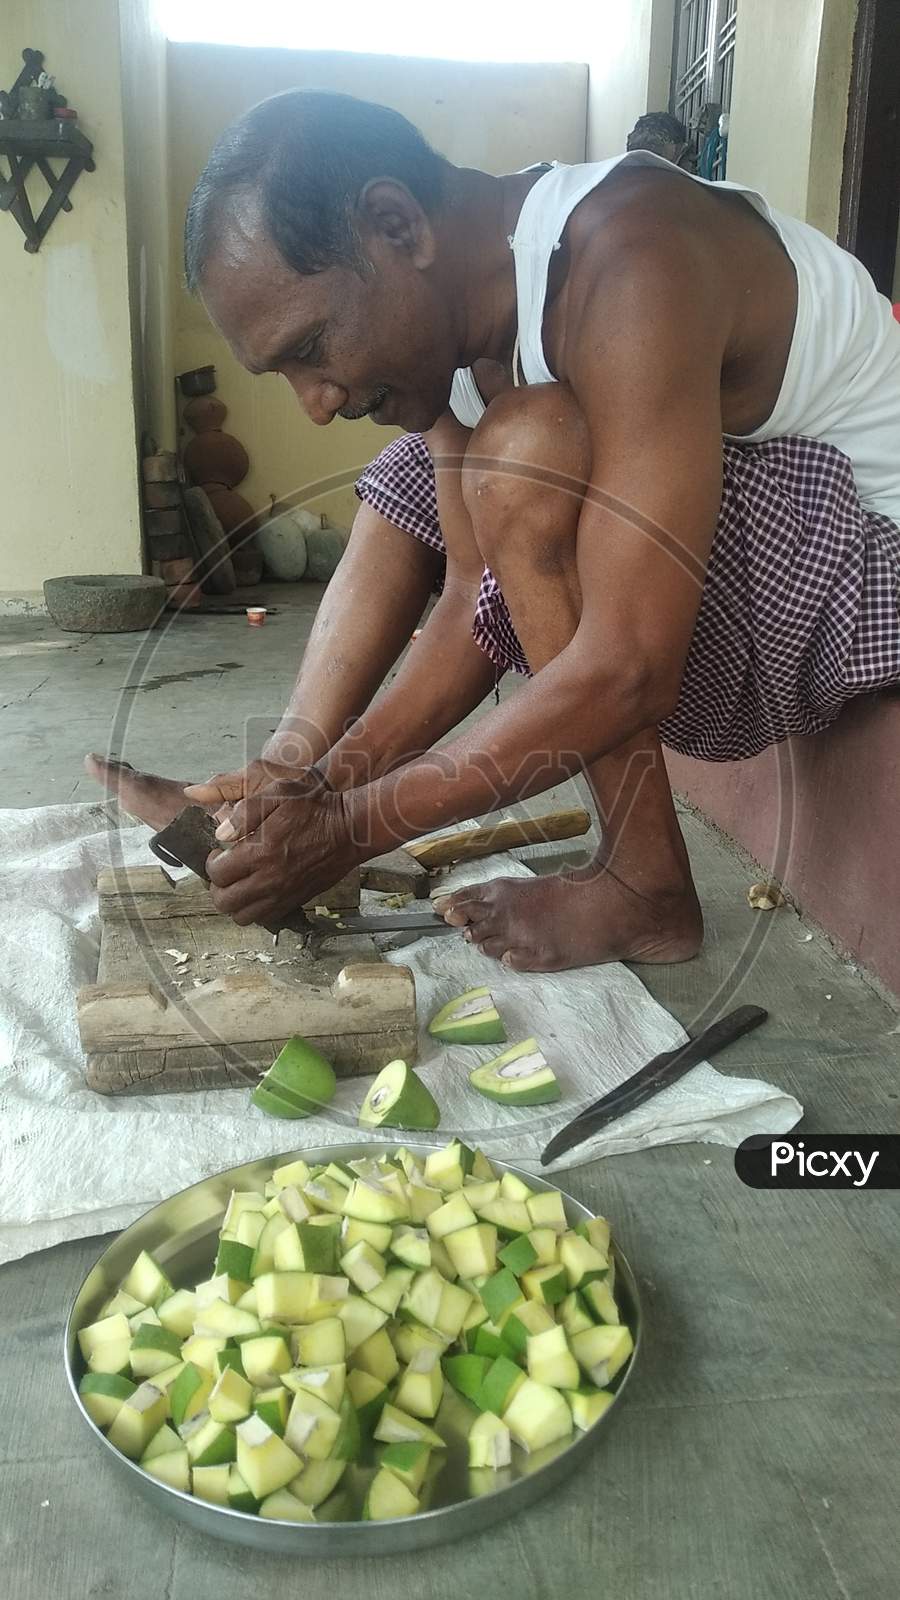 An Indian citizen cutting mangoes for making mango pickle